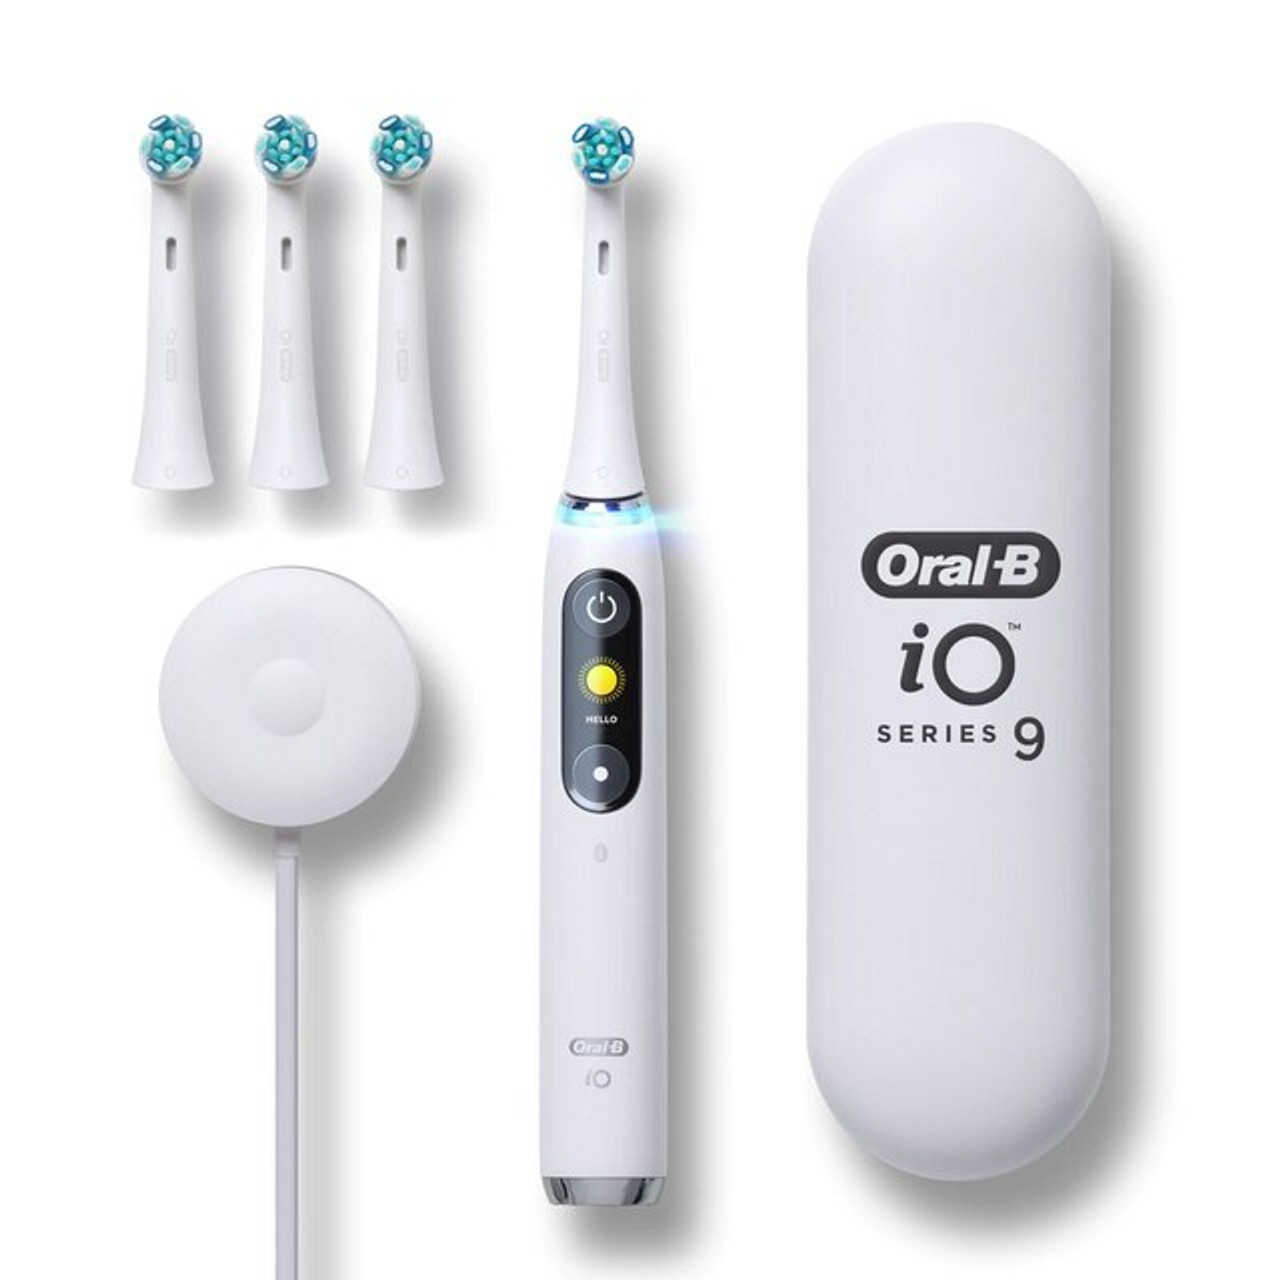 iO Series 9 RechargeableElectric Toothbrush, White Alabaster